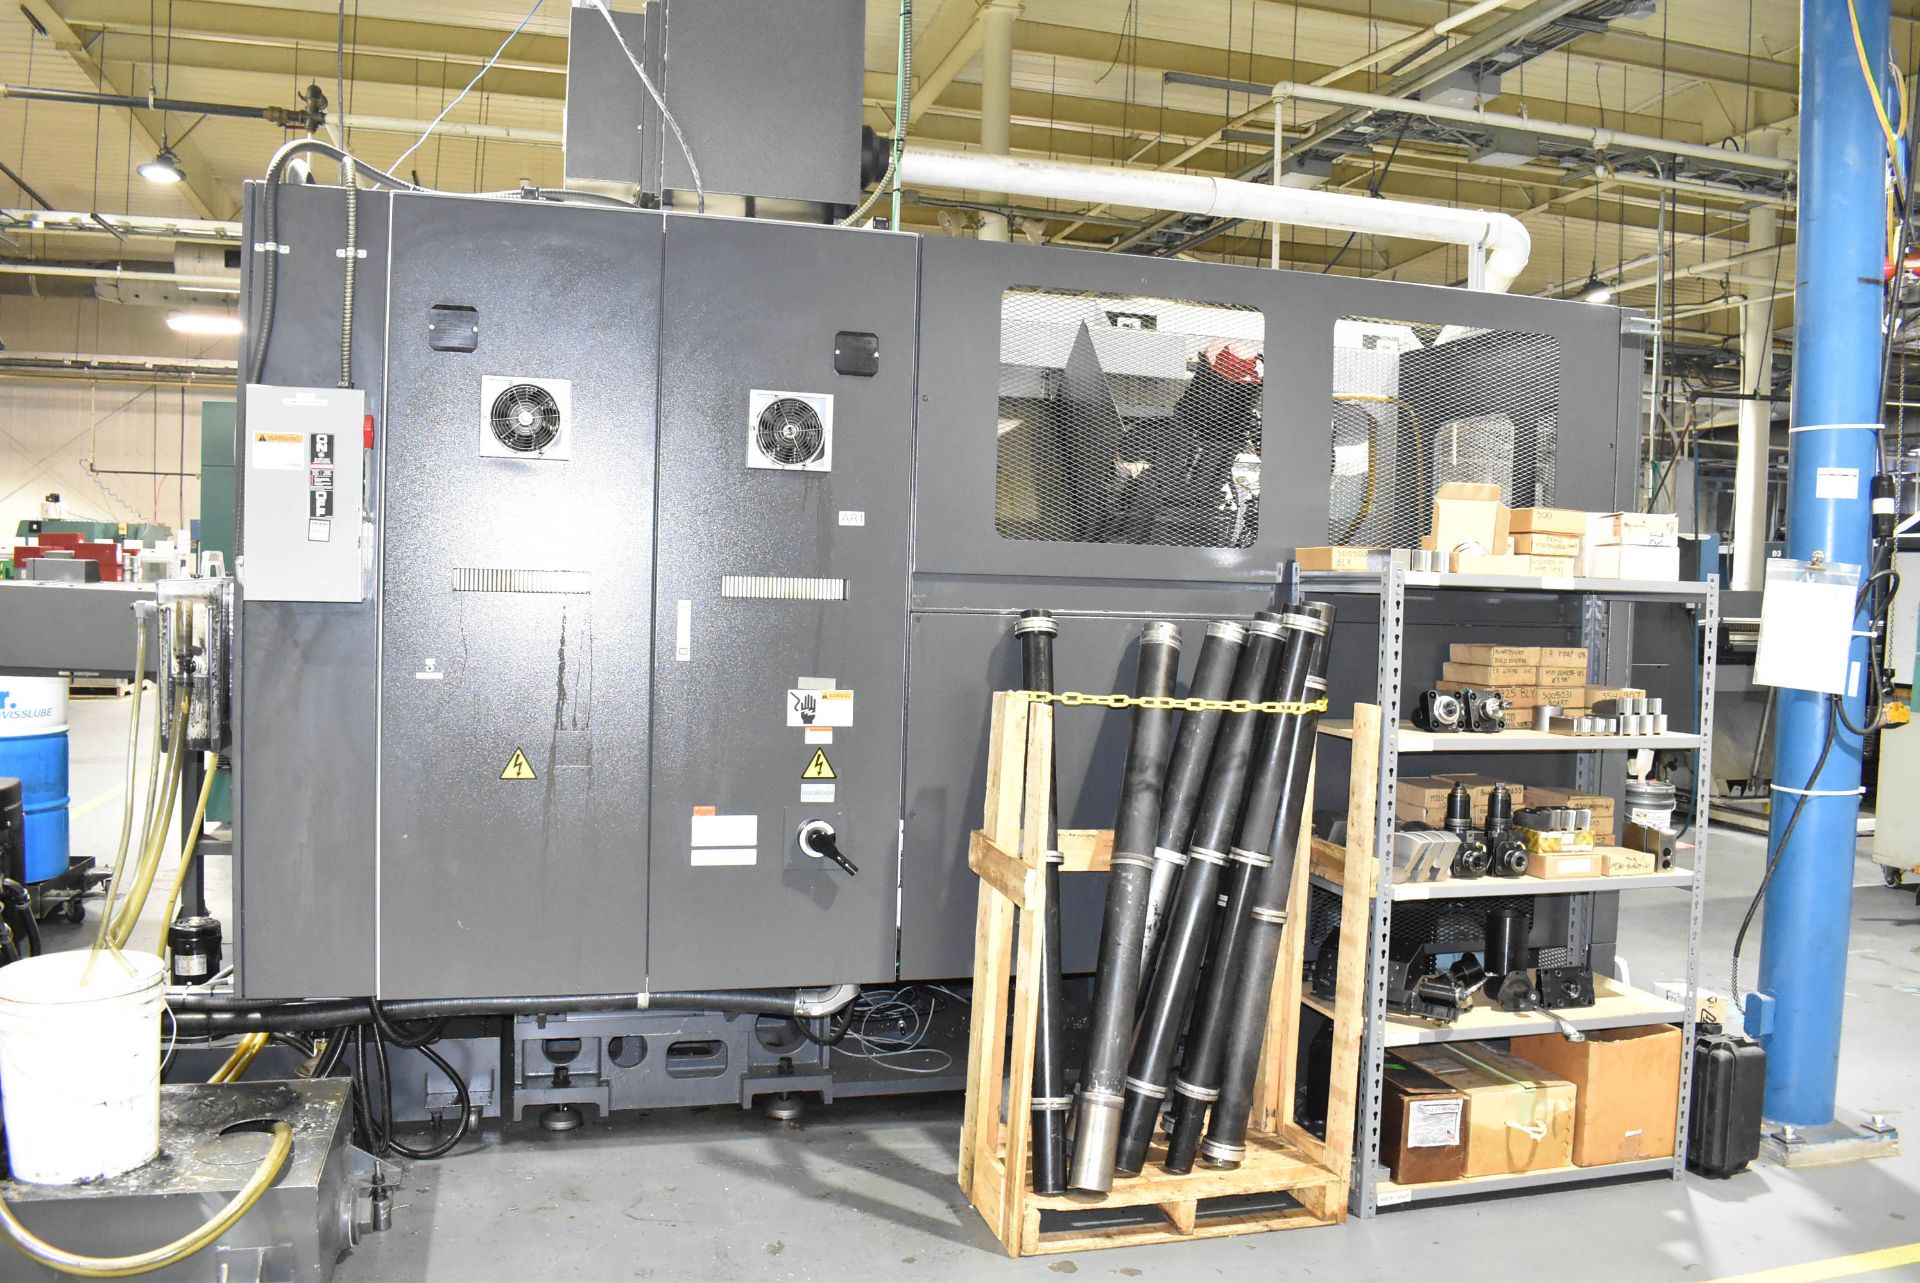 NAKAMURA-TOME (2018) WT-300 MULTI-AXIS OPPOSED SPINDLE AND TWIN TURRET CNC MULTI-TASKING CENTER WITH - Image 11 of 14